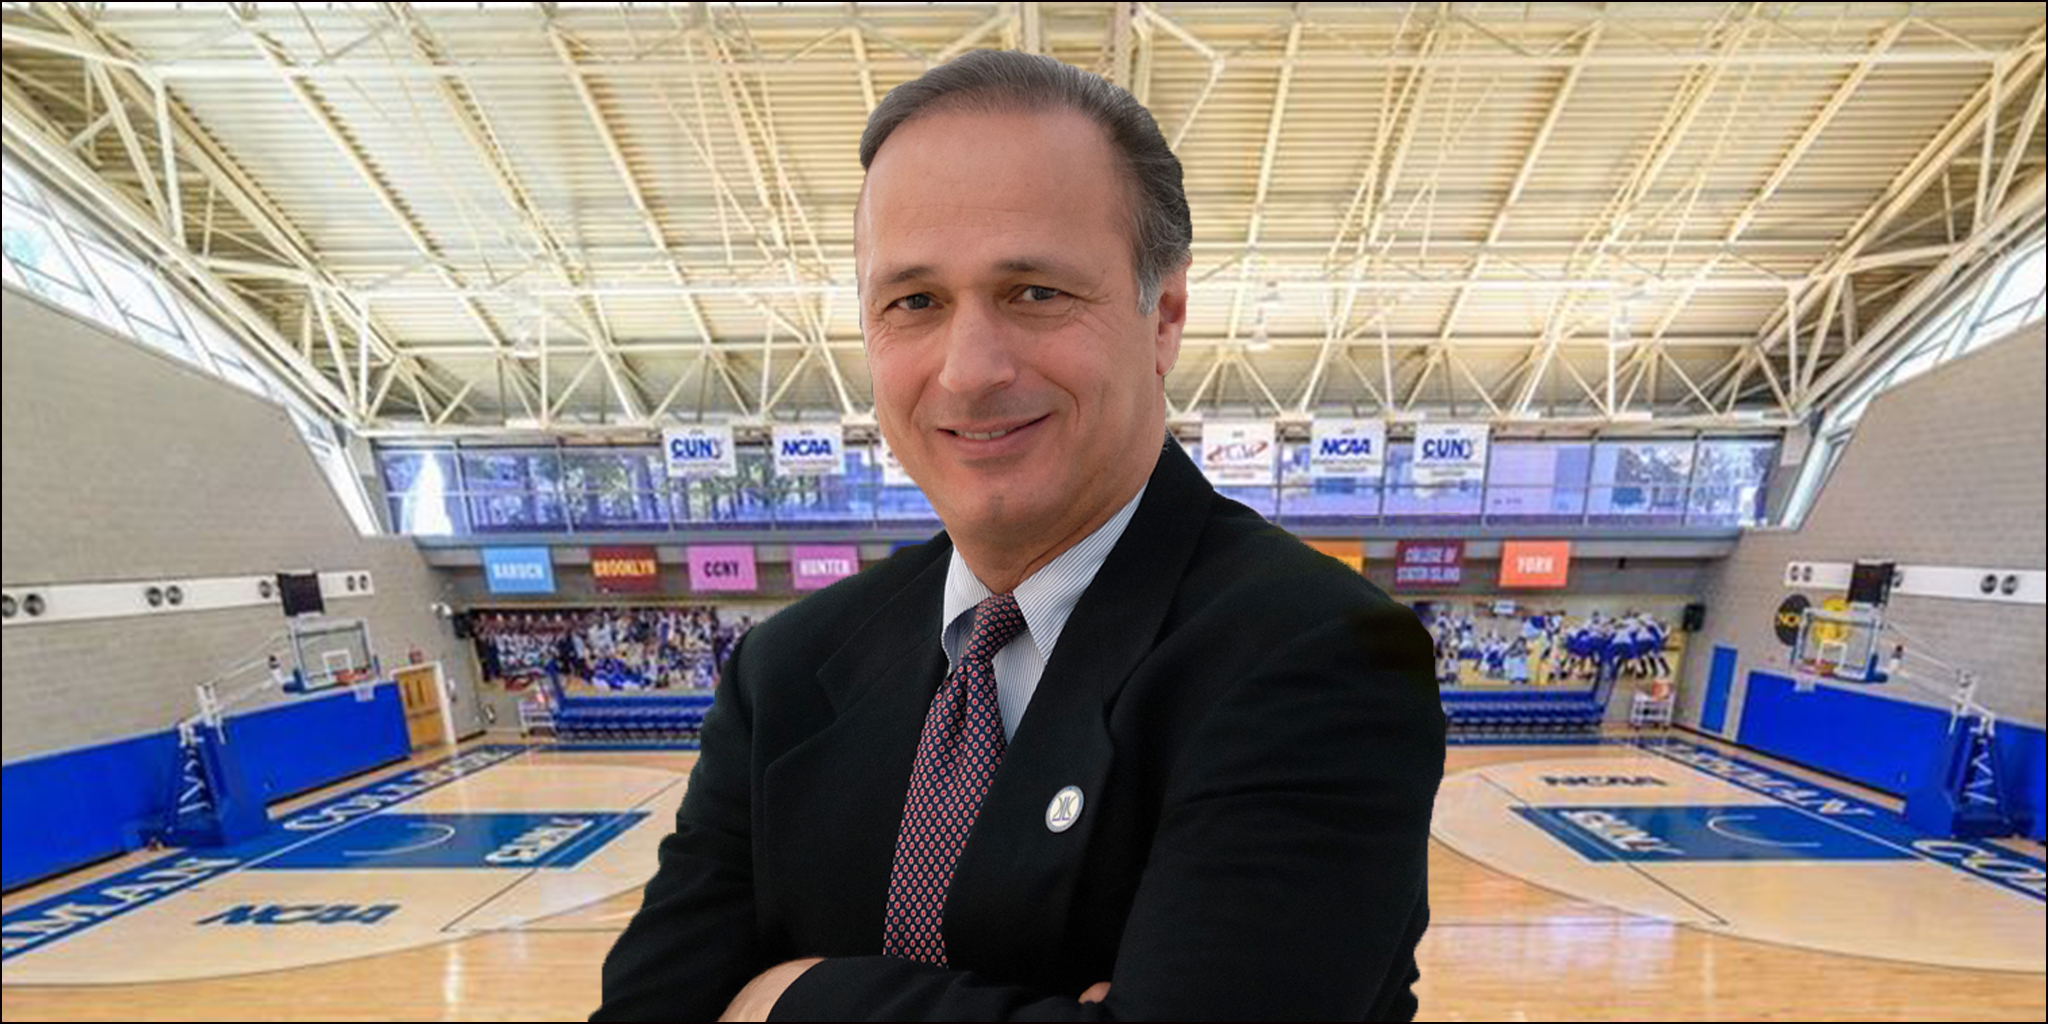 Lehman College Athletic Director Martin Zwiren Elected CUNYAC President